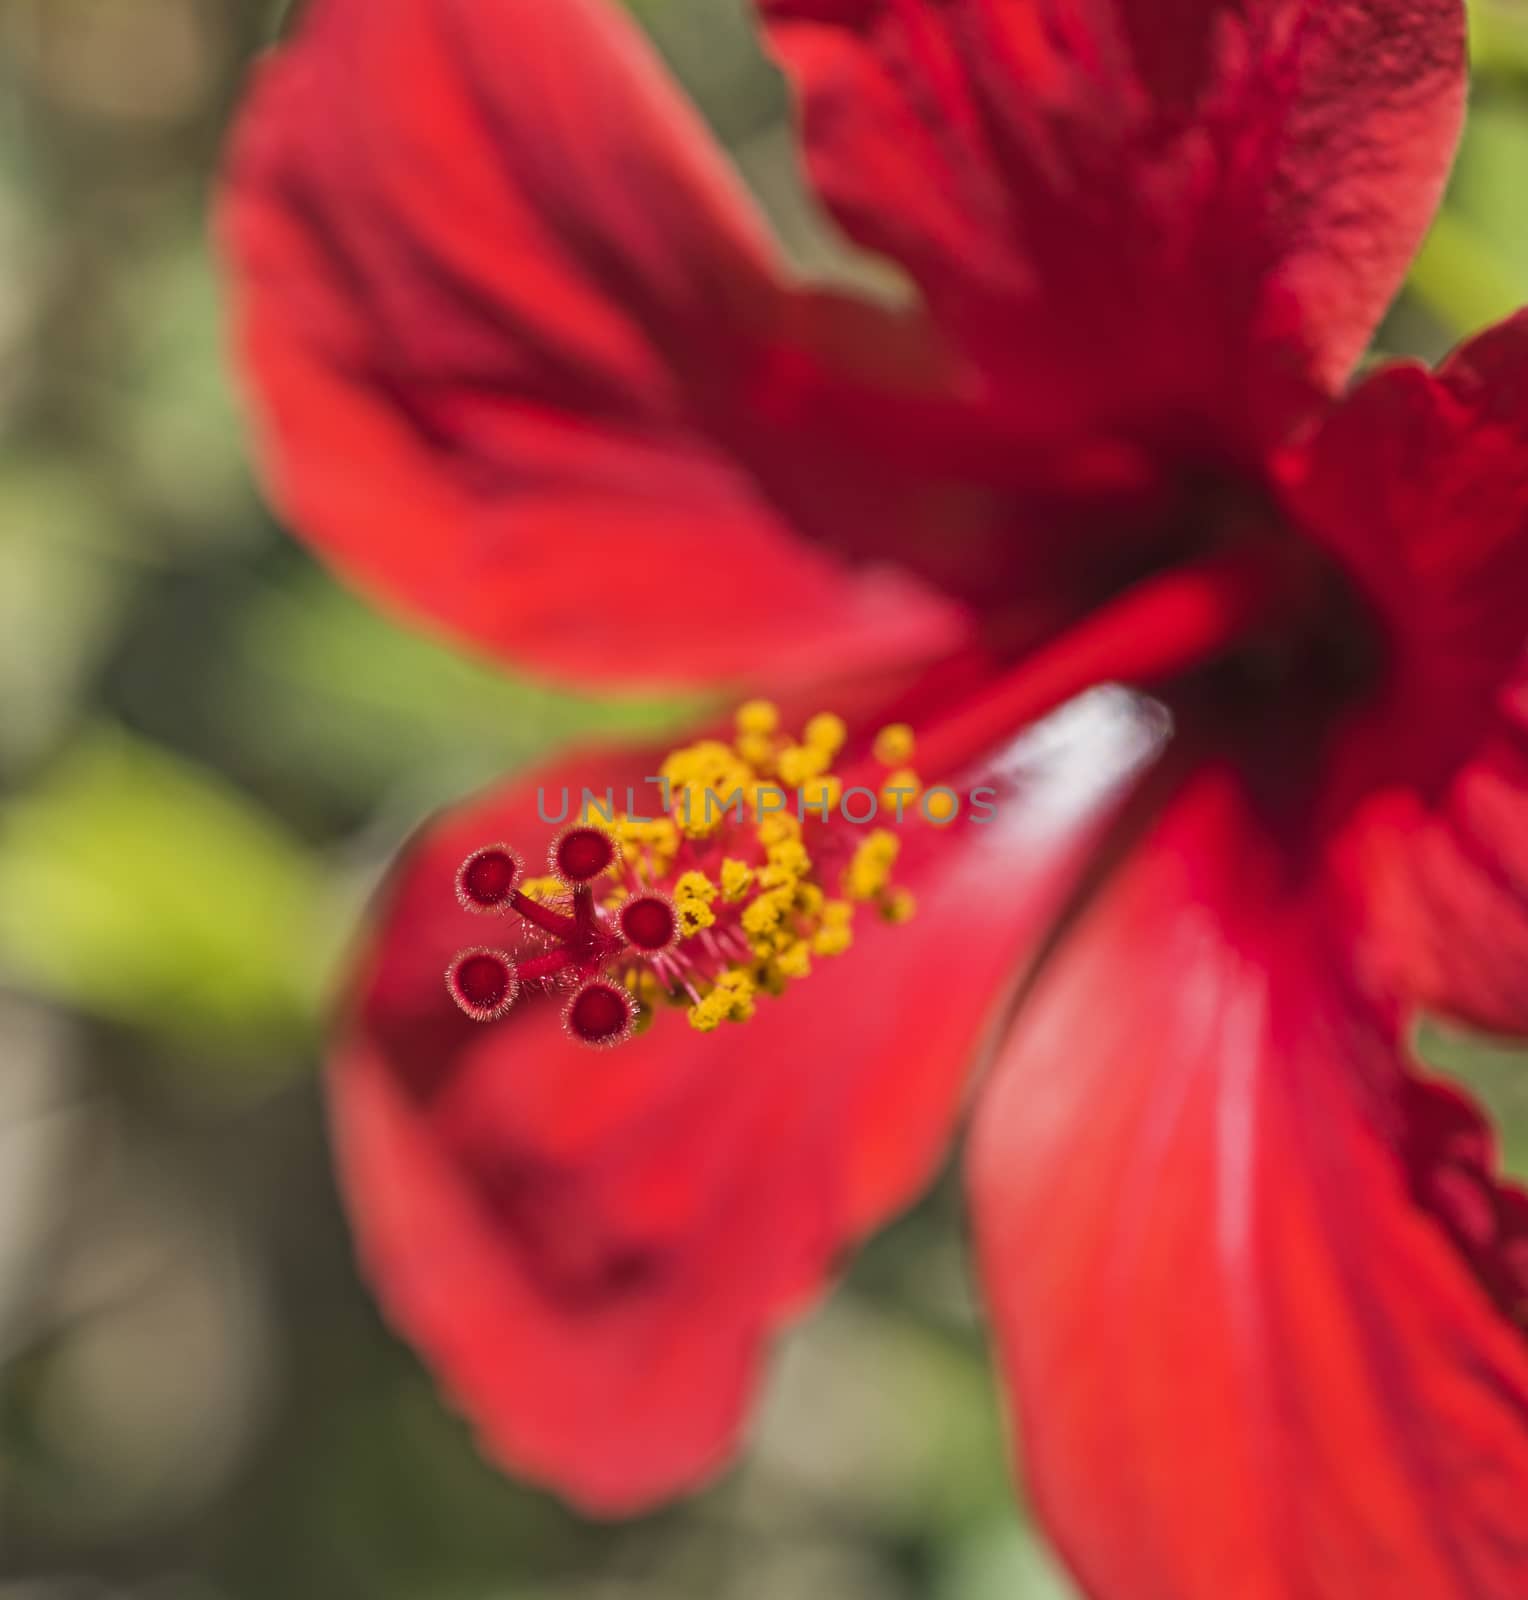 Close-up detail of a red hibiscus rosa sinensis flower petals and stigma in garden